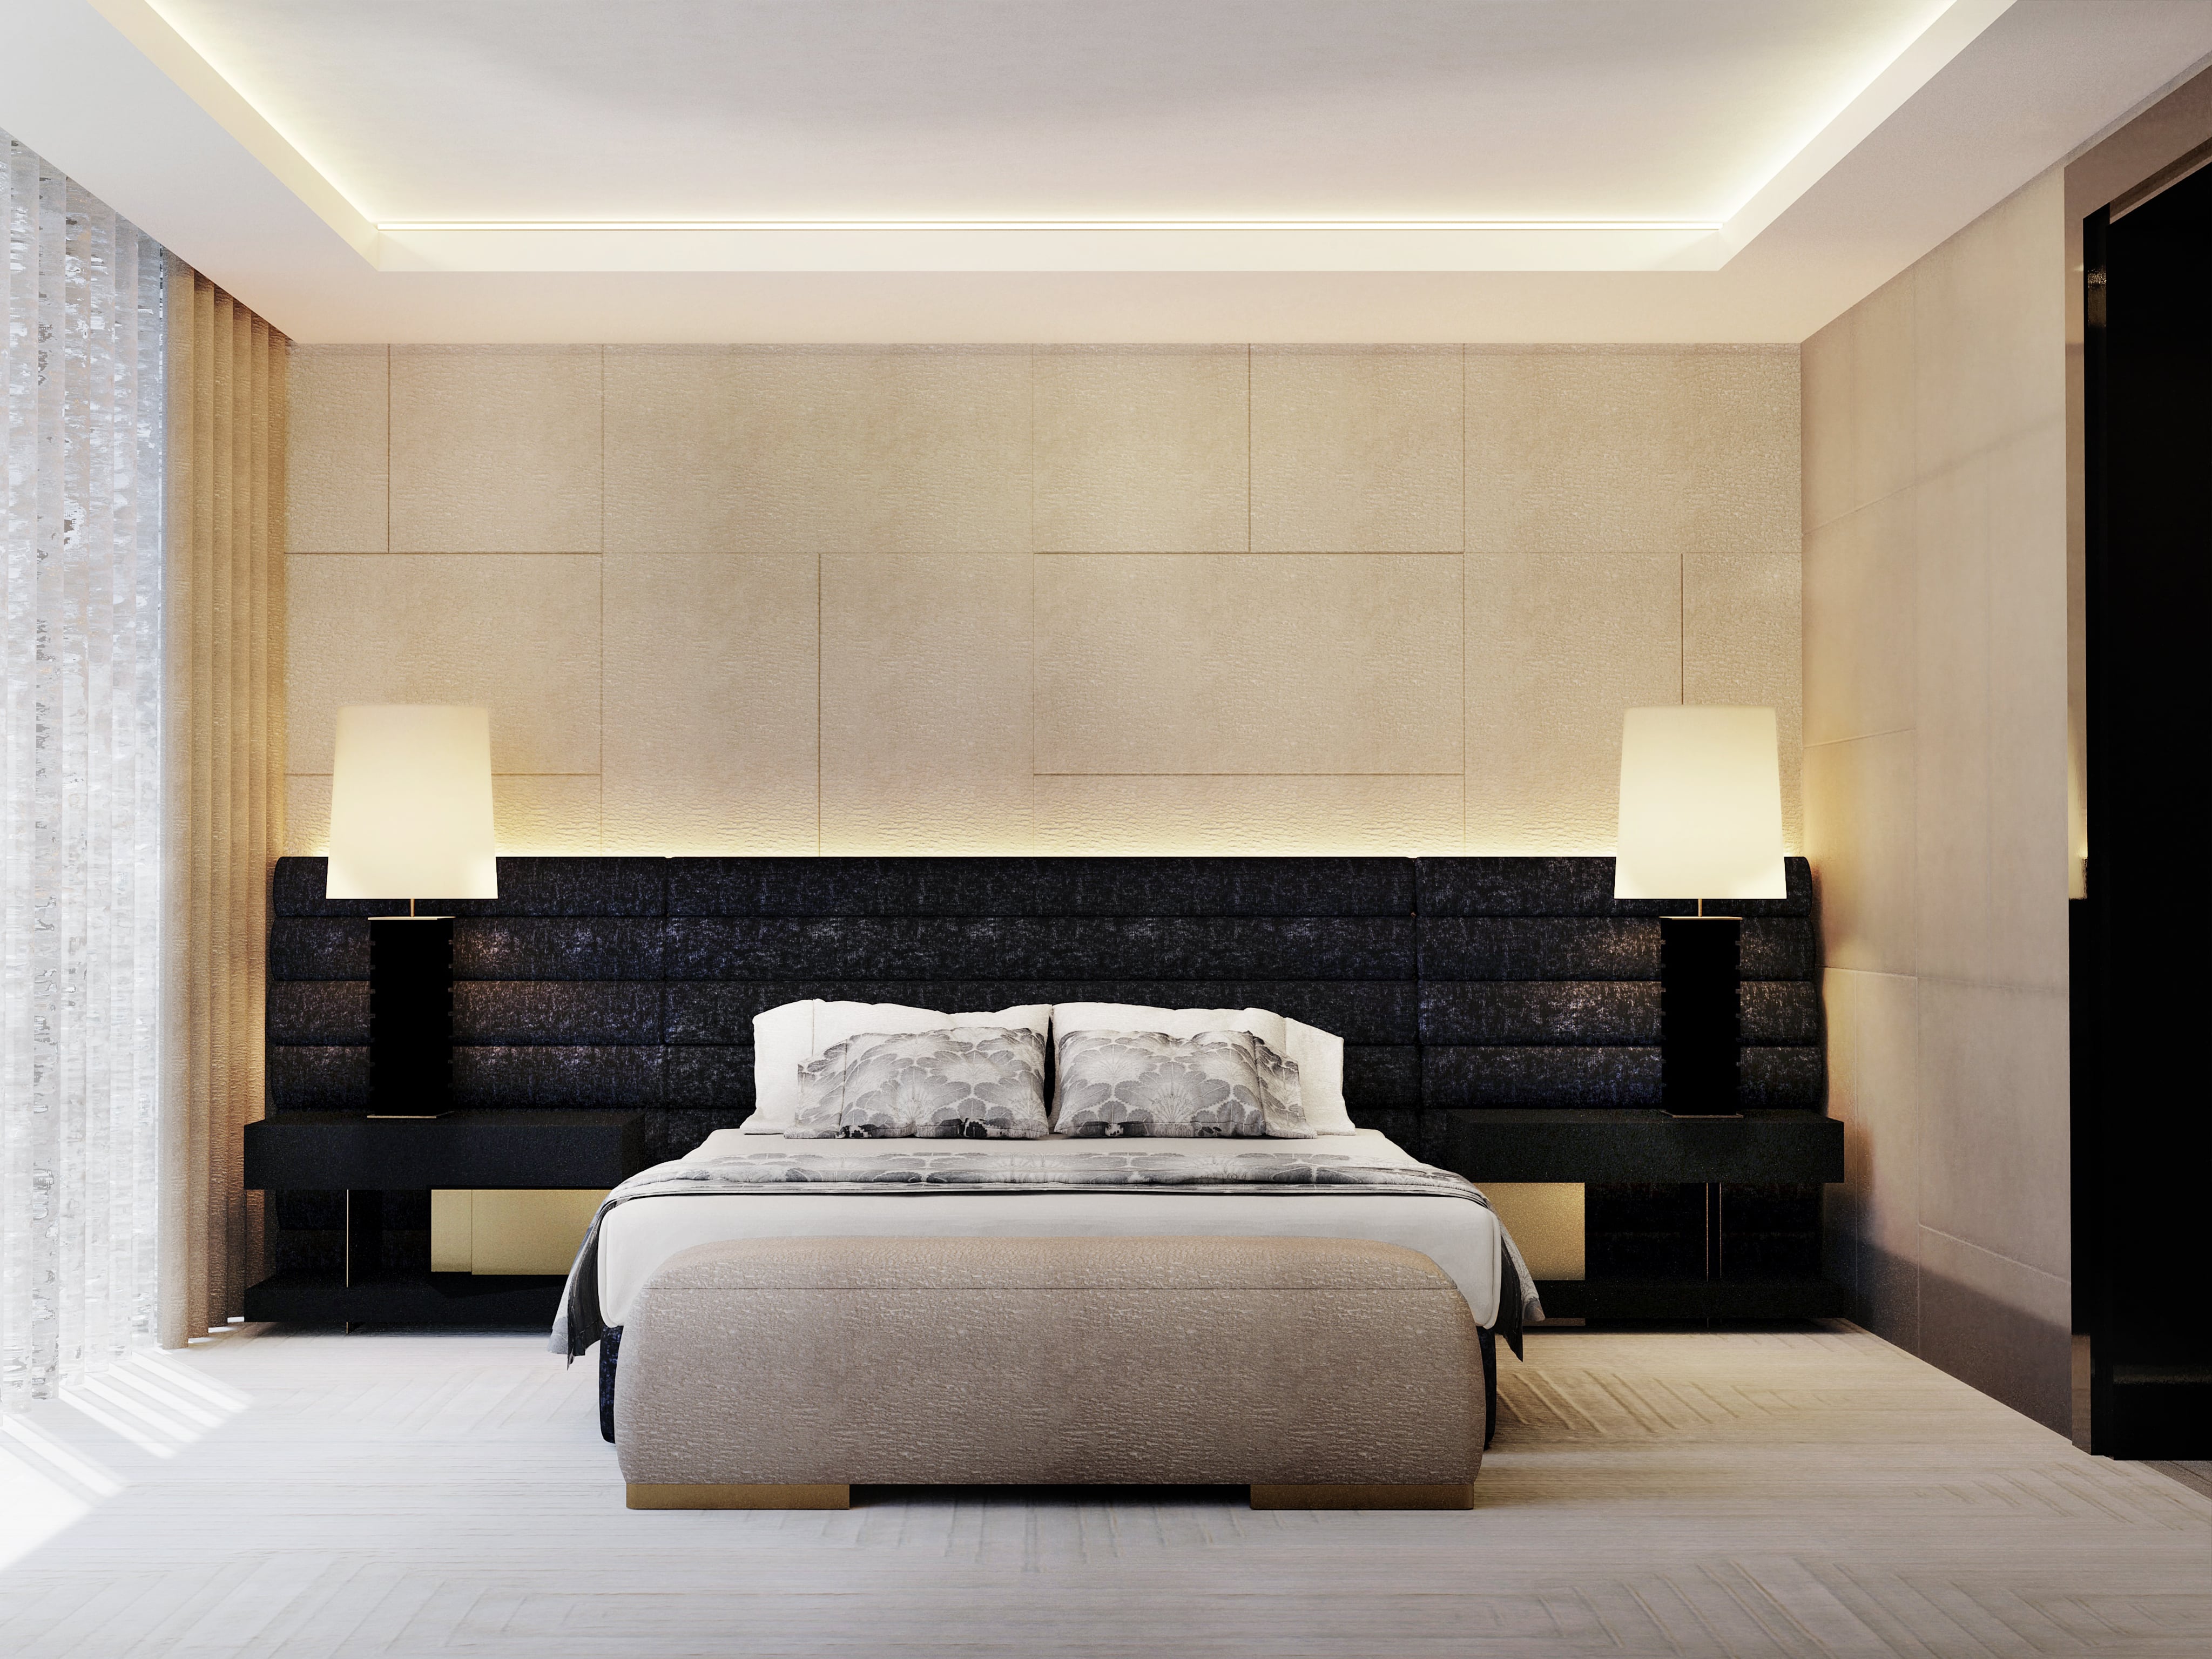 Neutral Master Bedroom Design With Outstanding Table Lamps - Home'Society